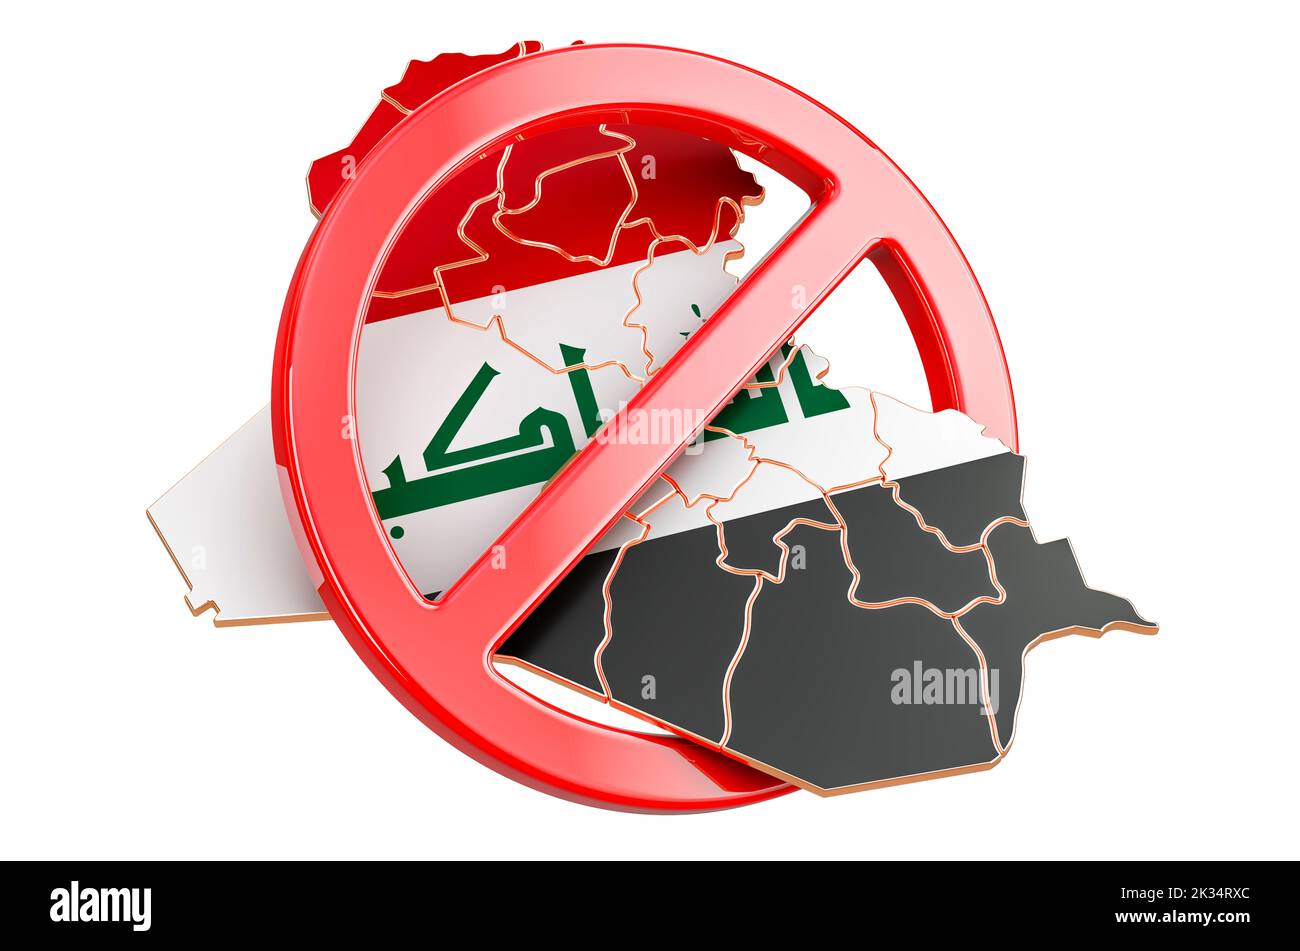 Iraqi map with forbidden sign, 3D rendering isolated on white background Stock Photo